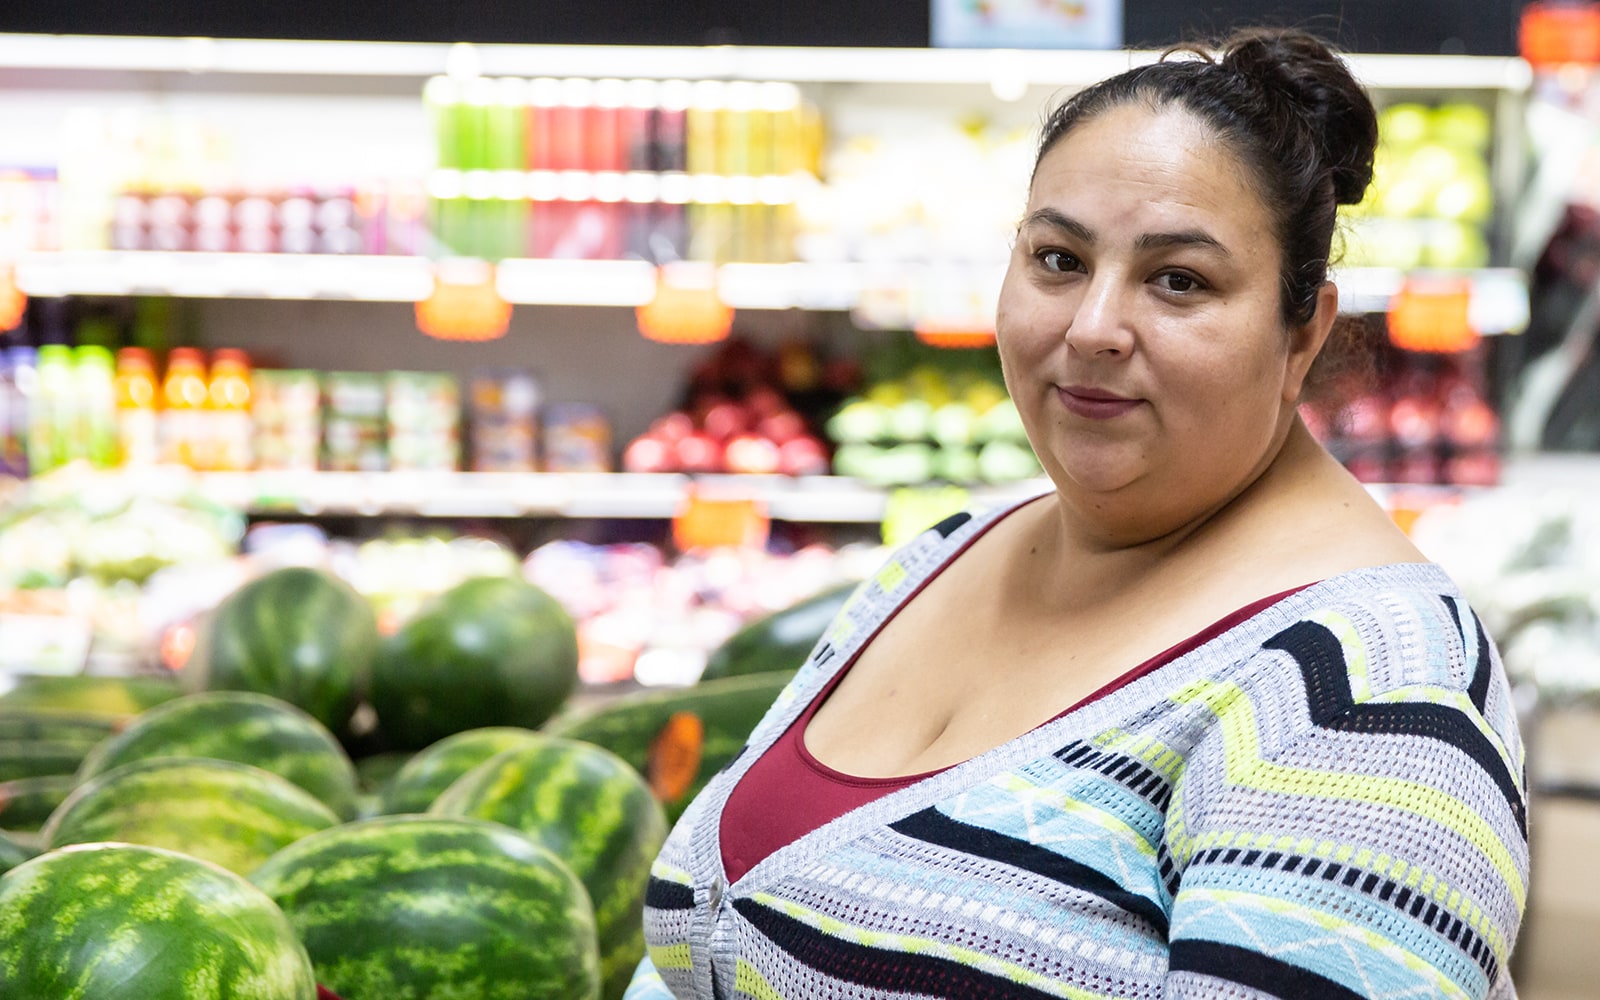 Miroslava, a woman wearing a red shirt and blue sweater standing in a grocery store near watermelons